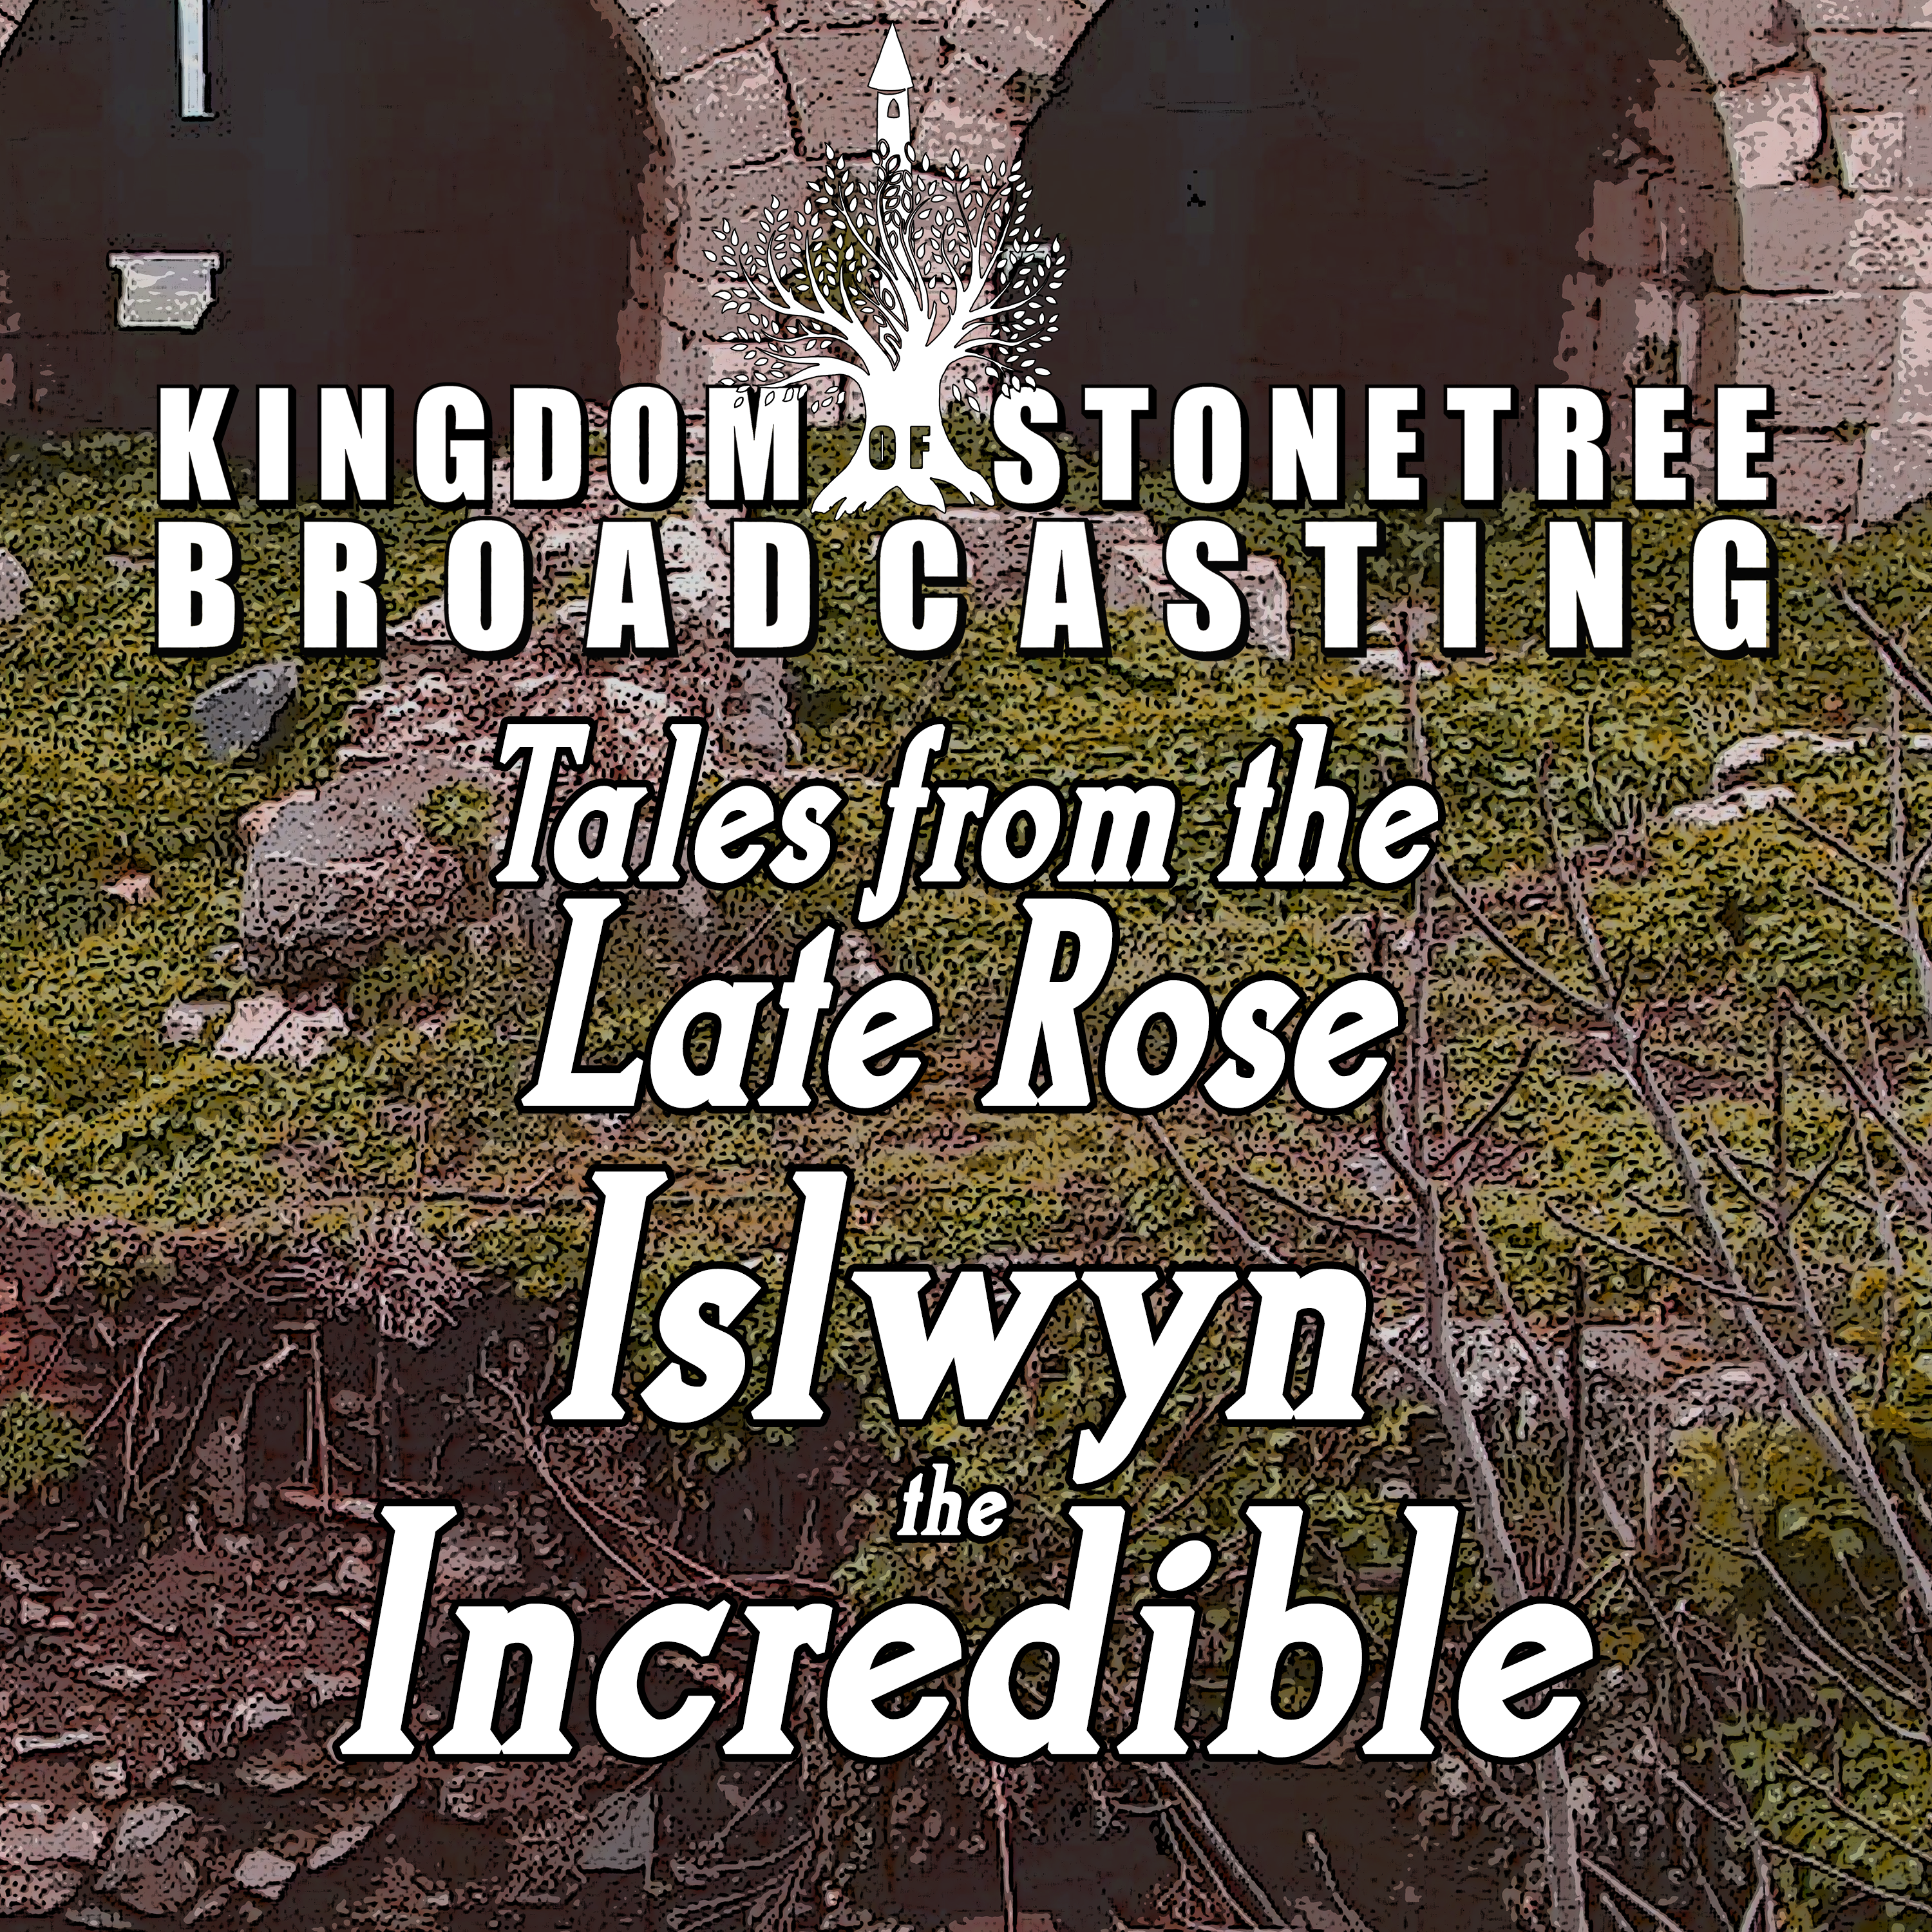 Tales from the Late Rose: Islwyn the Incredible